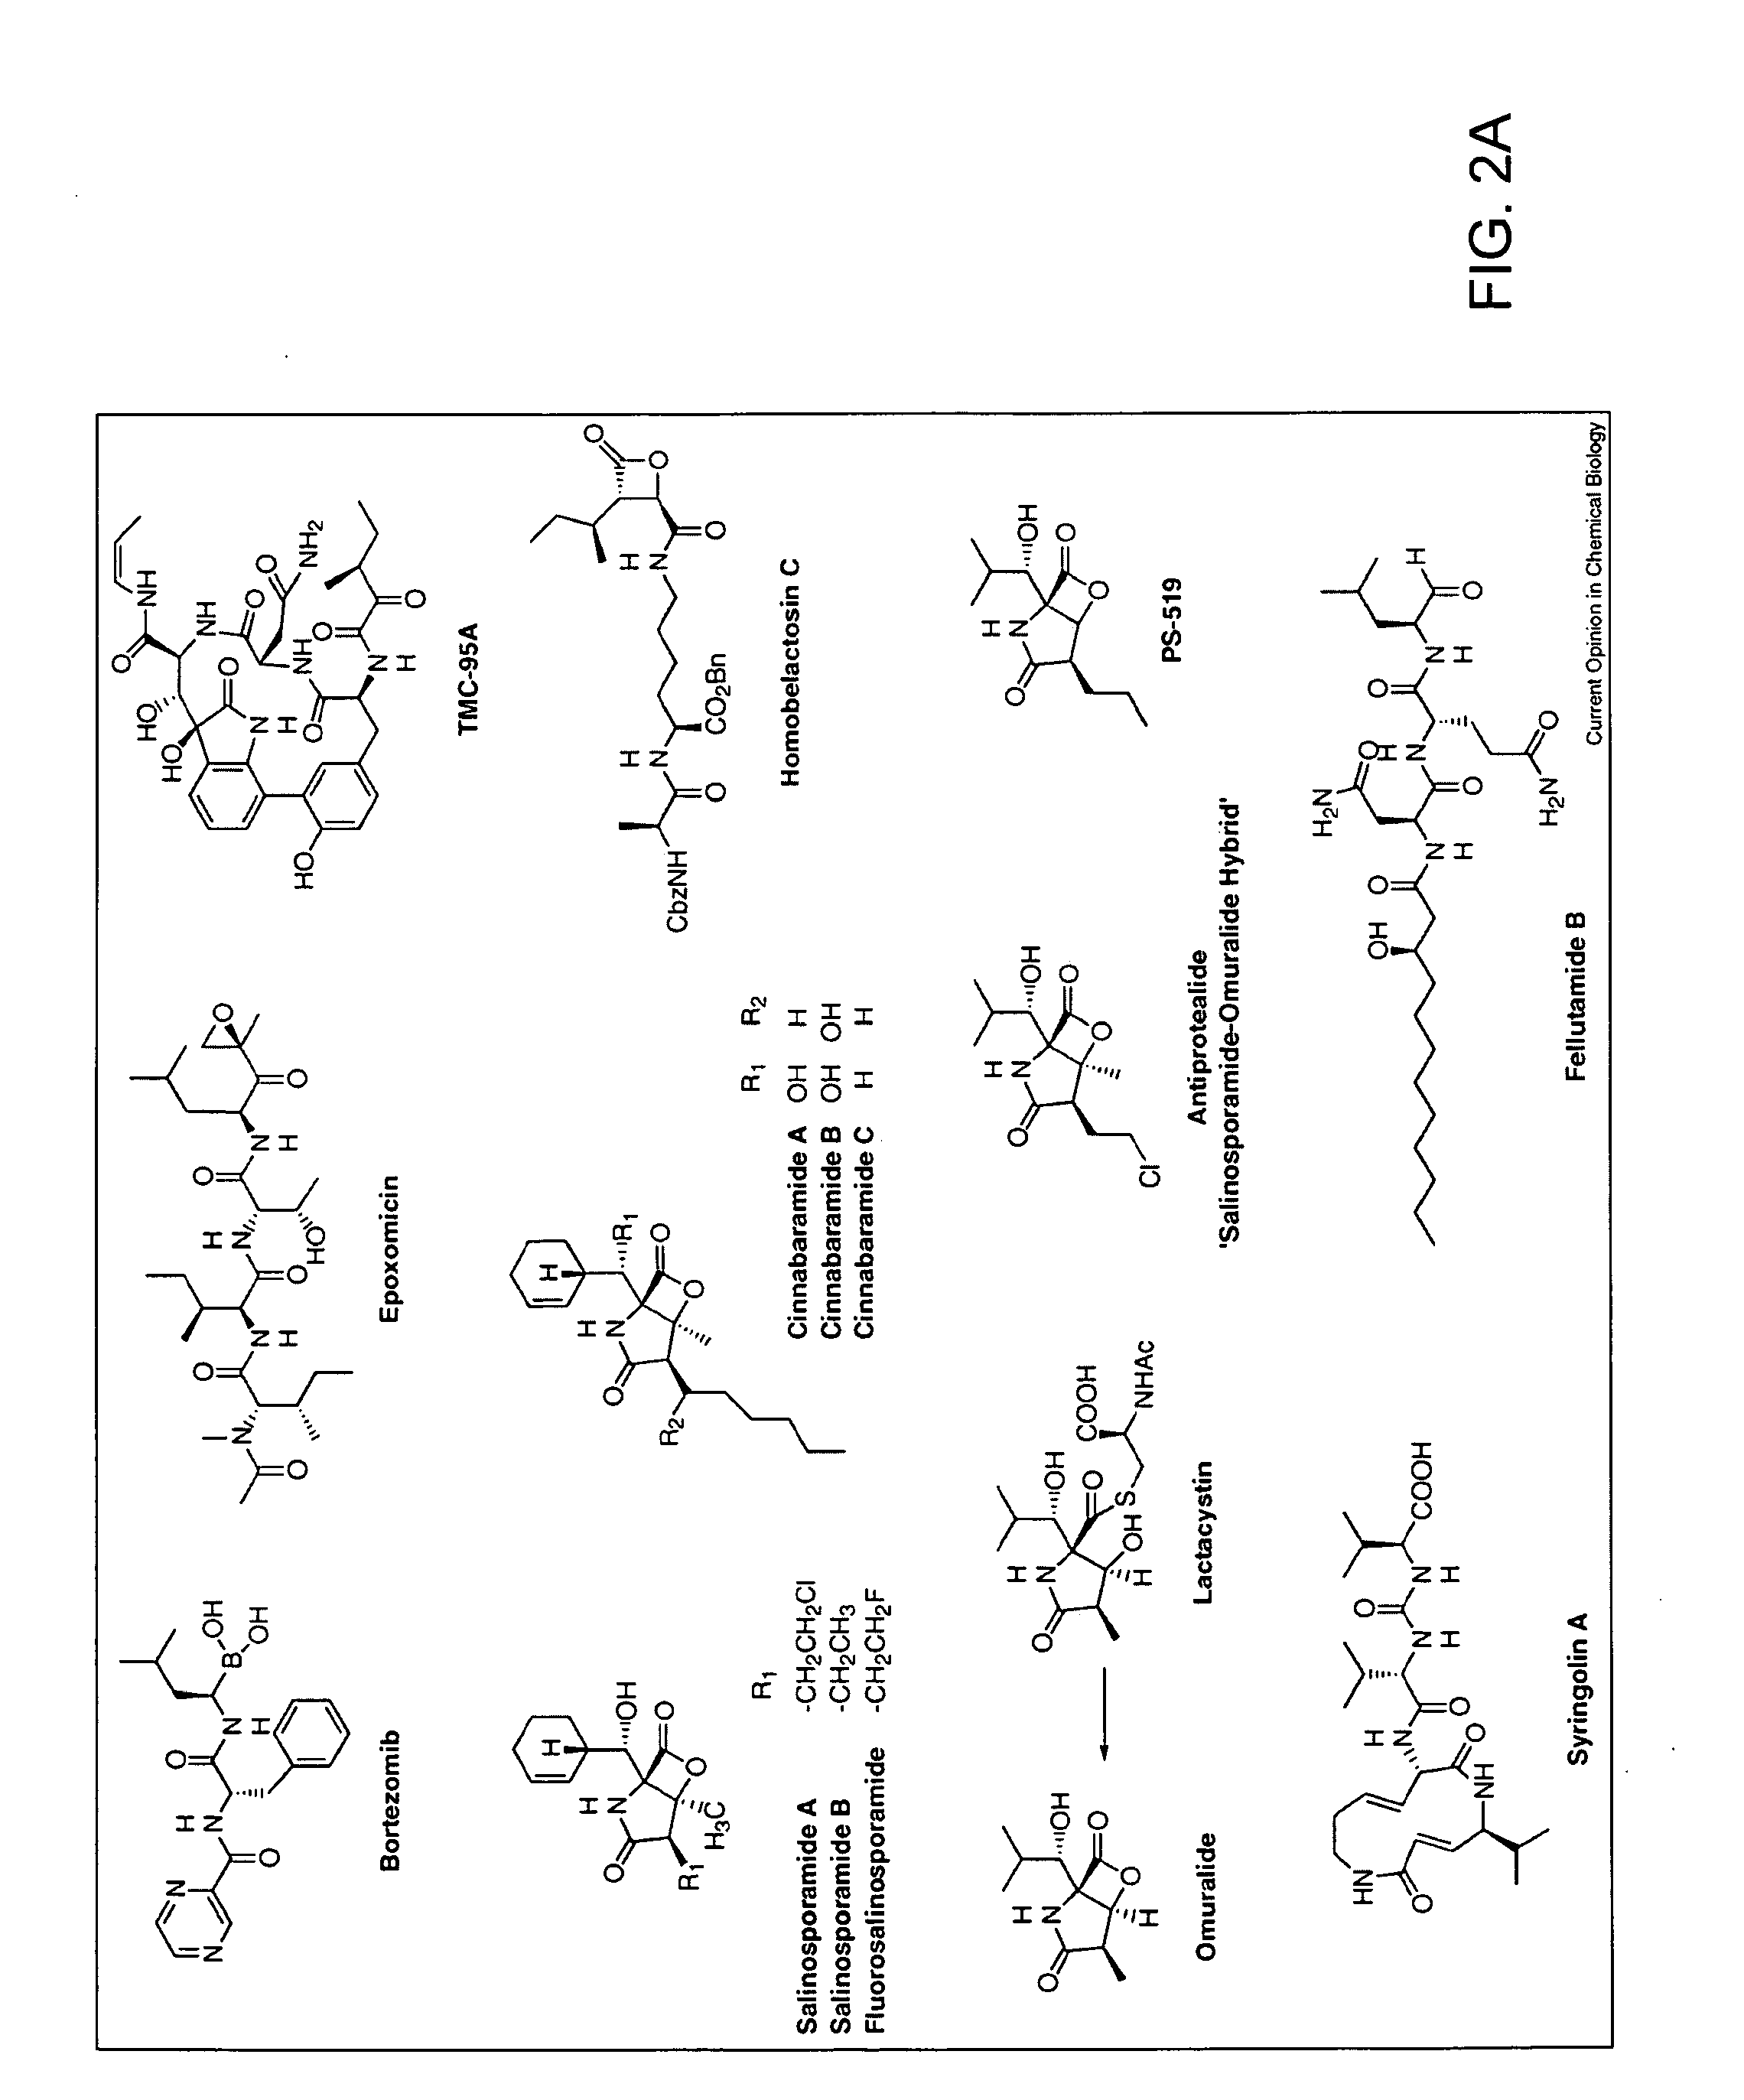 Method of treating patients undergoing protein replacement therapy, gene replacement therapy, or other therapeutic modalities